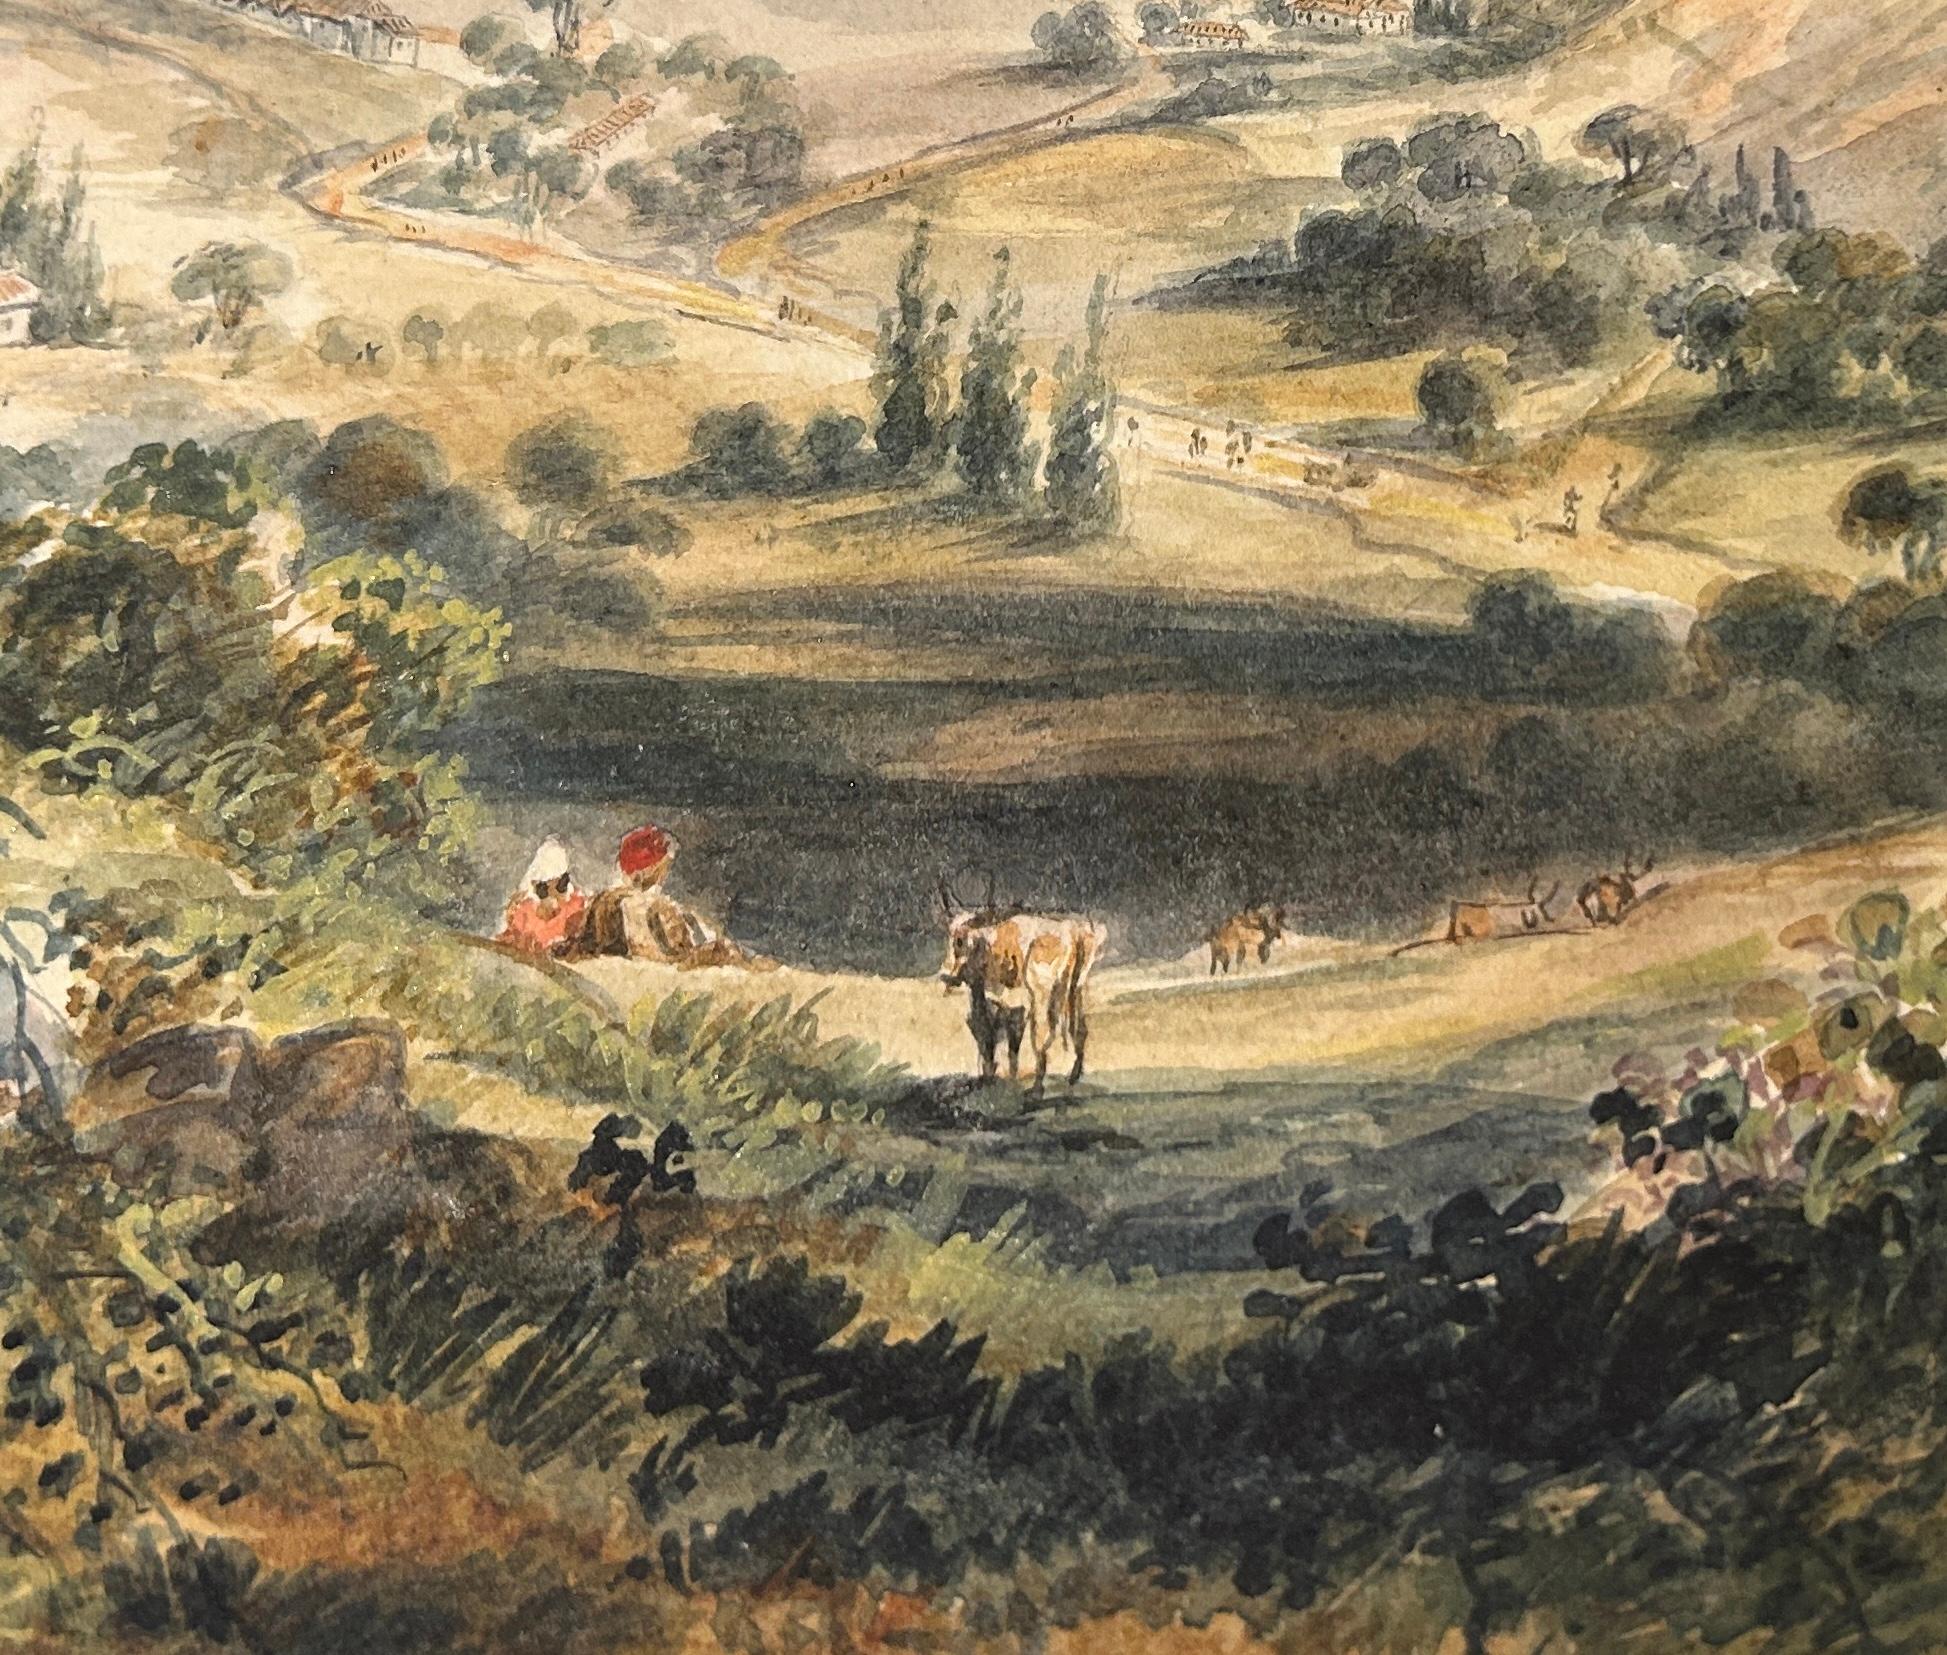 India Watercolour Landscape 19th century Ootacamund Dated 1856 Signed in Pencil - Other Art Style Art by Unknown